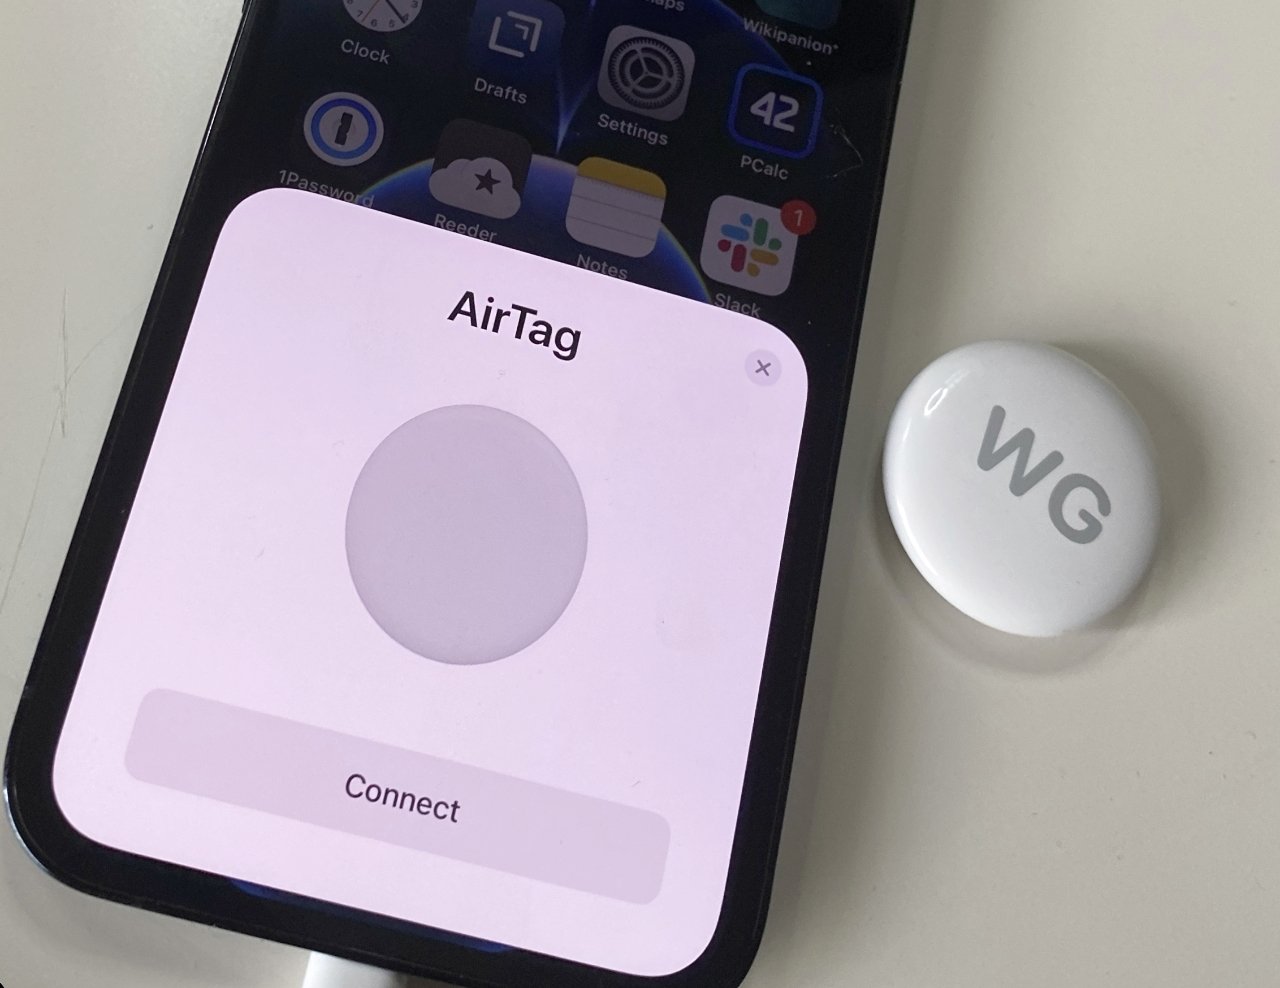 Pull the cover off your AirTag and then hold it next to your iPhone